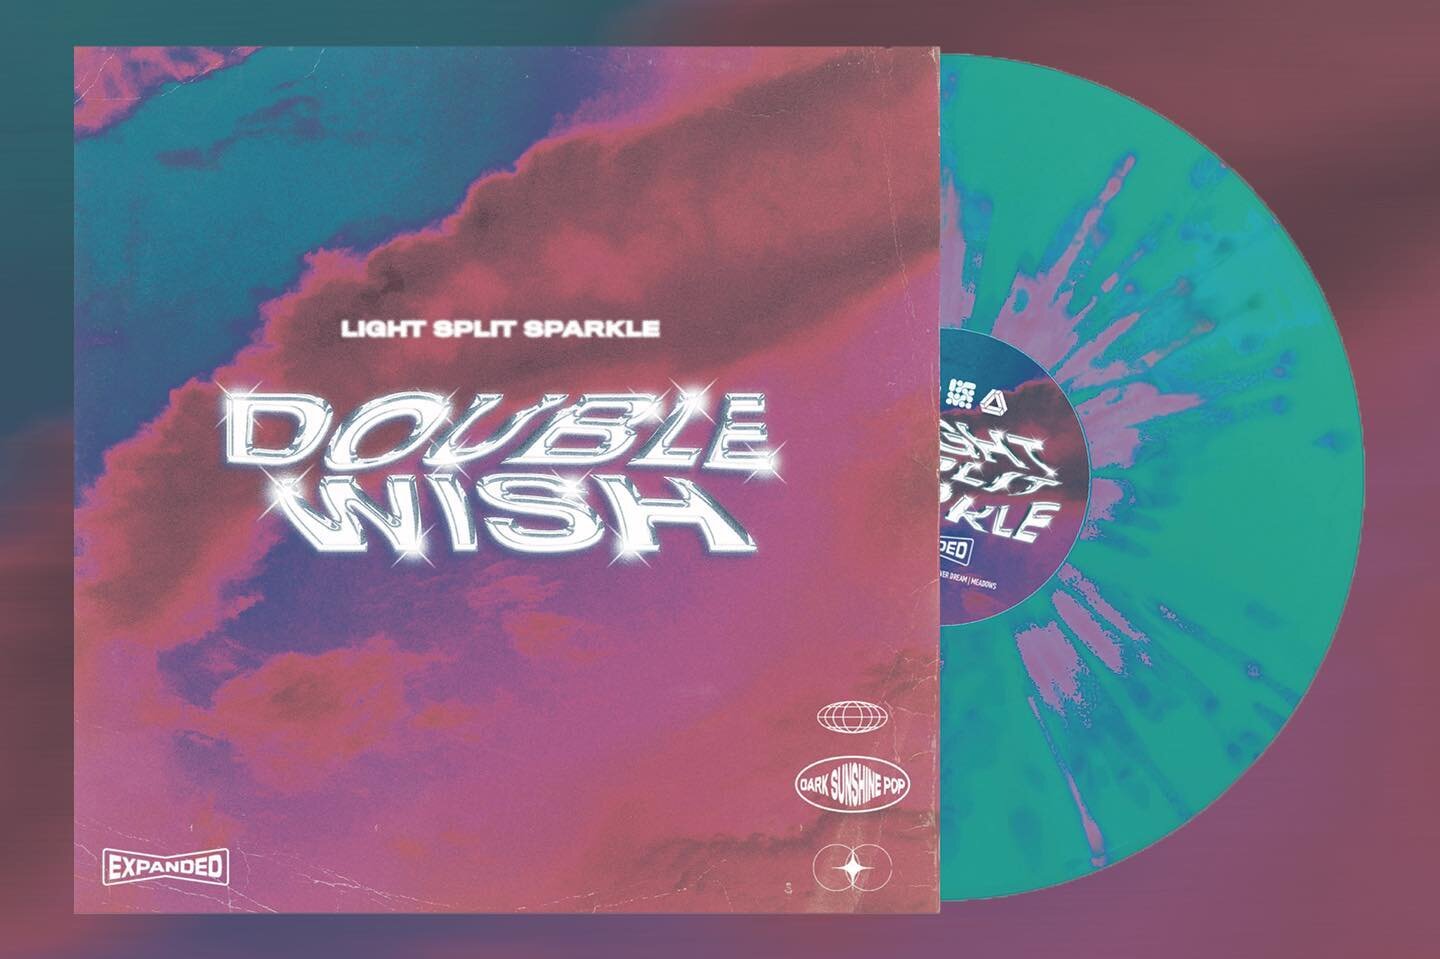 @ddoublewish &lsquo;Light Split Sparkle Expanded&rsquo; (@neonbloodbath collaboration release)

With four additional tracks - &ldquo;Edge to Edge&rdquo; out today - across two limited edition 140g colorways, we couldn&rsquo;t be more excited about th